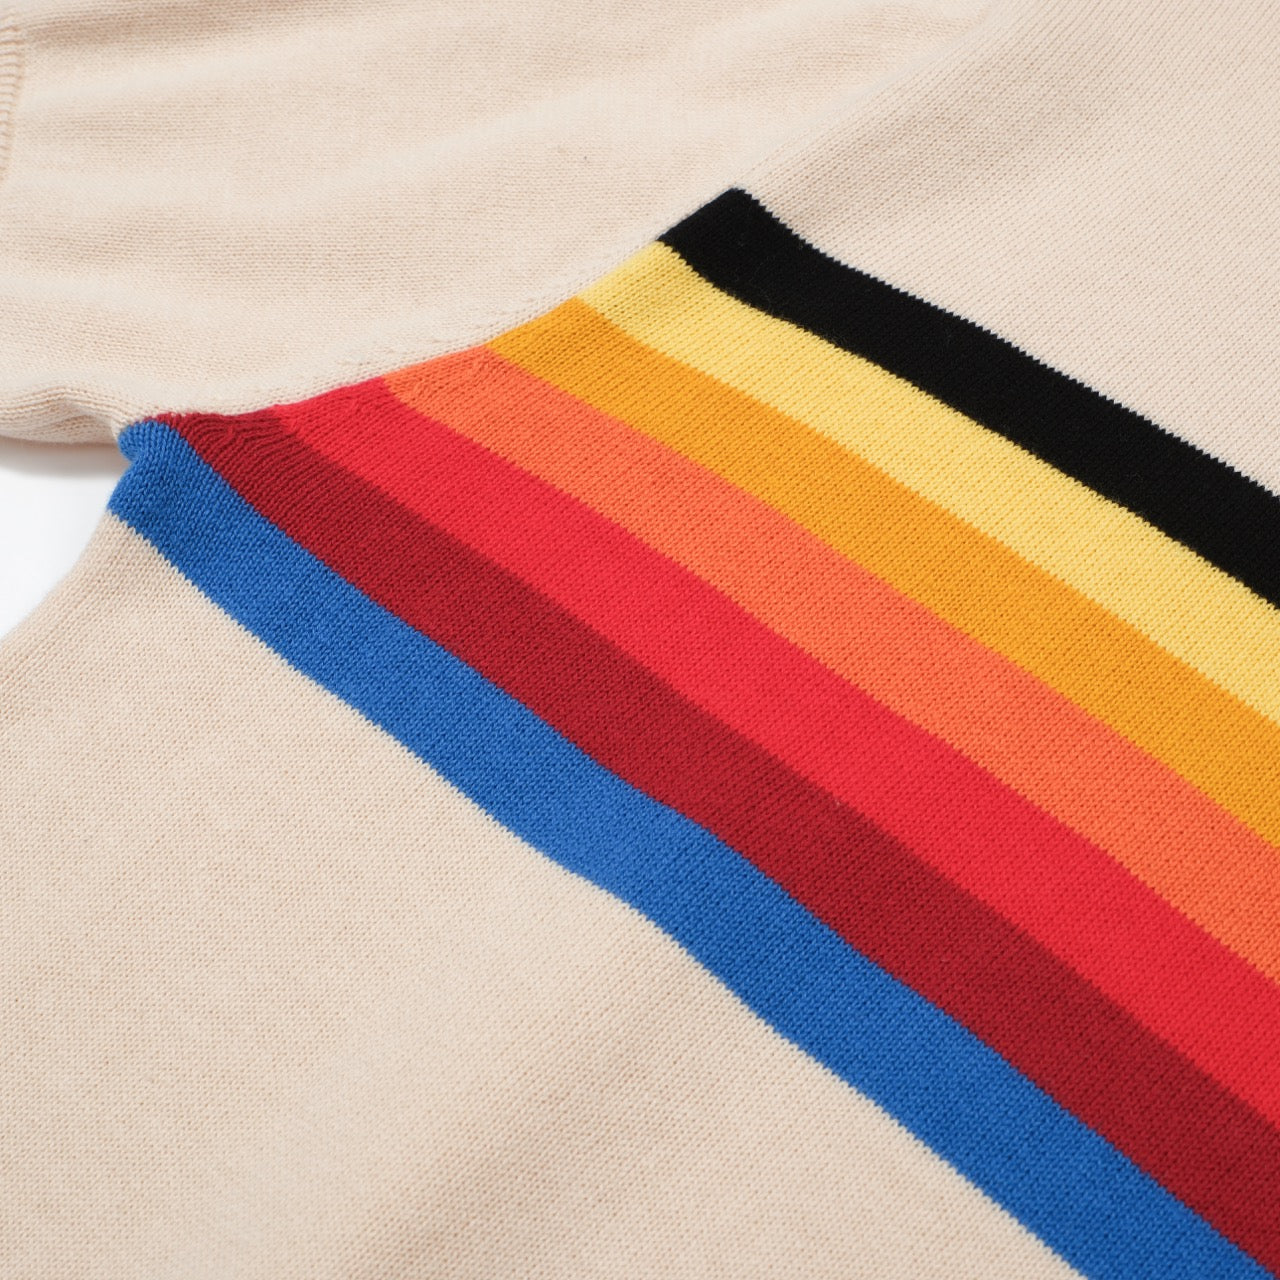 OXKNIT Men Vintage Clothing 1960s Mod Style Casual Rainbow Chest Stripe Knitted Retro Tee (Ecru)